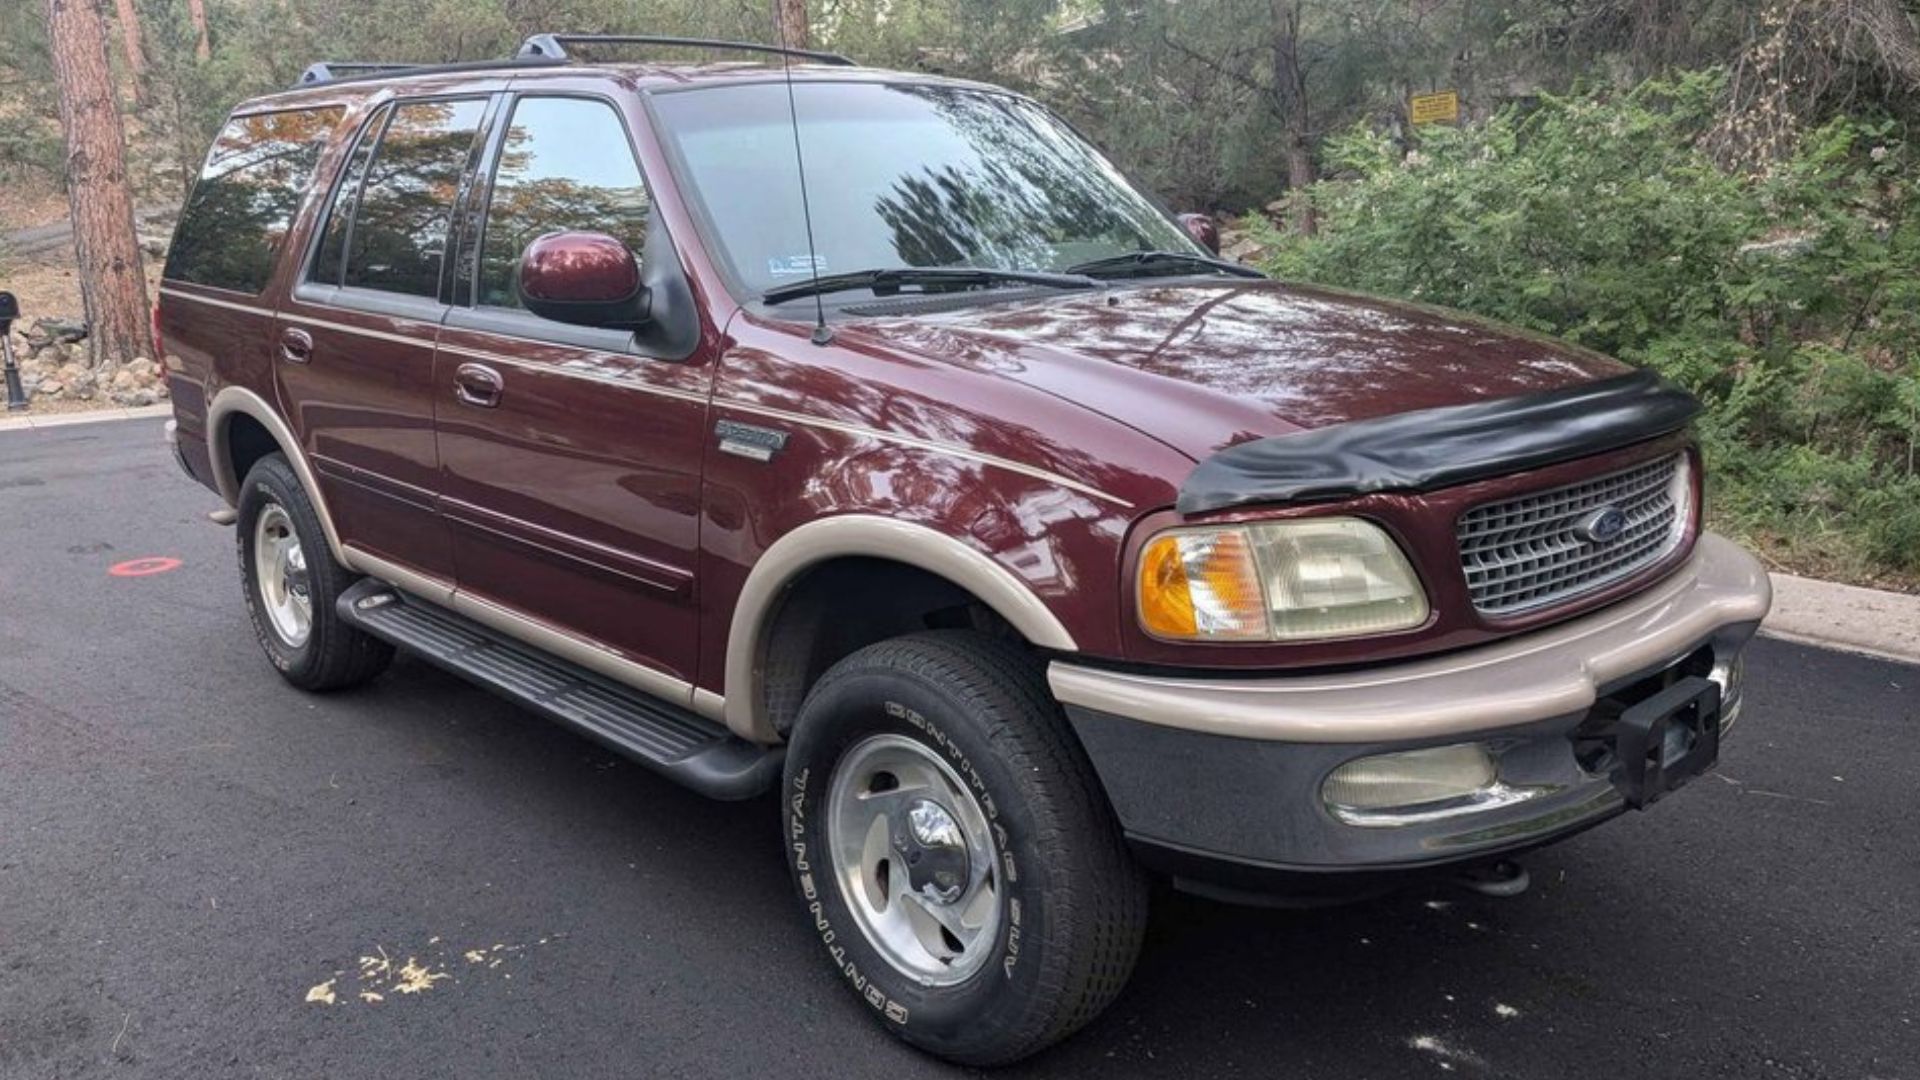 Ford Expedition Owner Awarded Almost $57 Million In Lawsuit